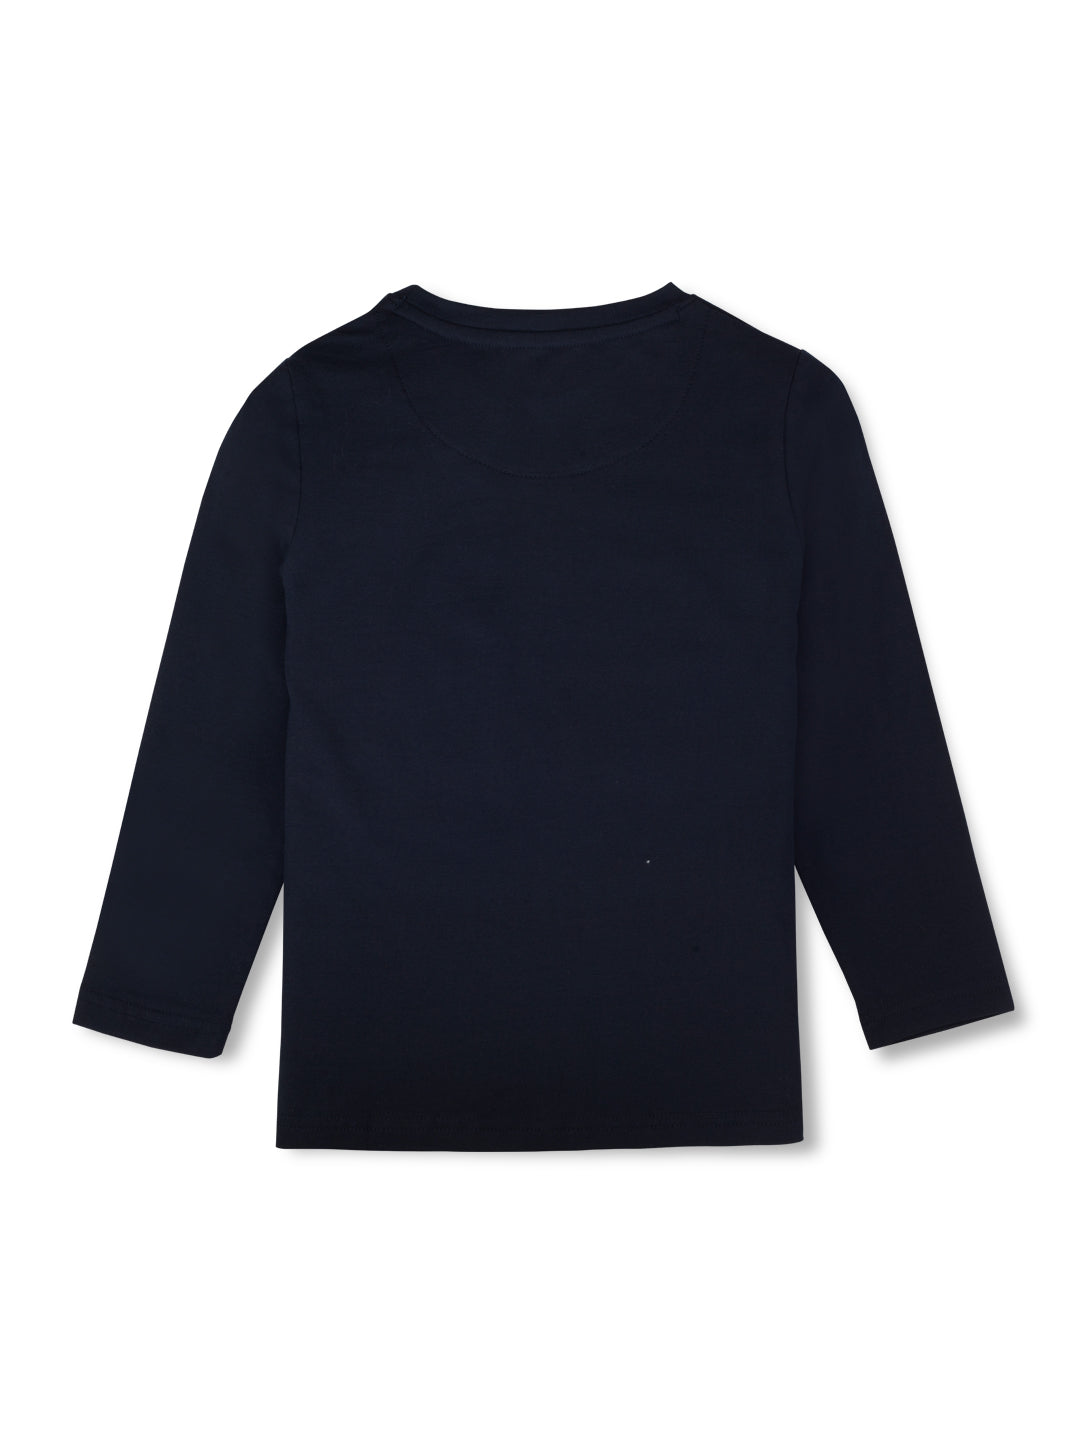 Girls Blue Solid Cotton Full Sleeves Knits Top